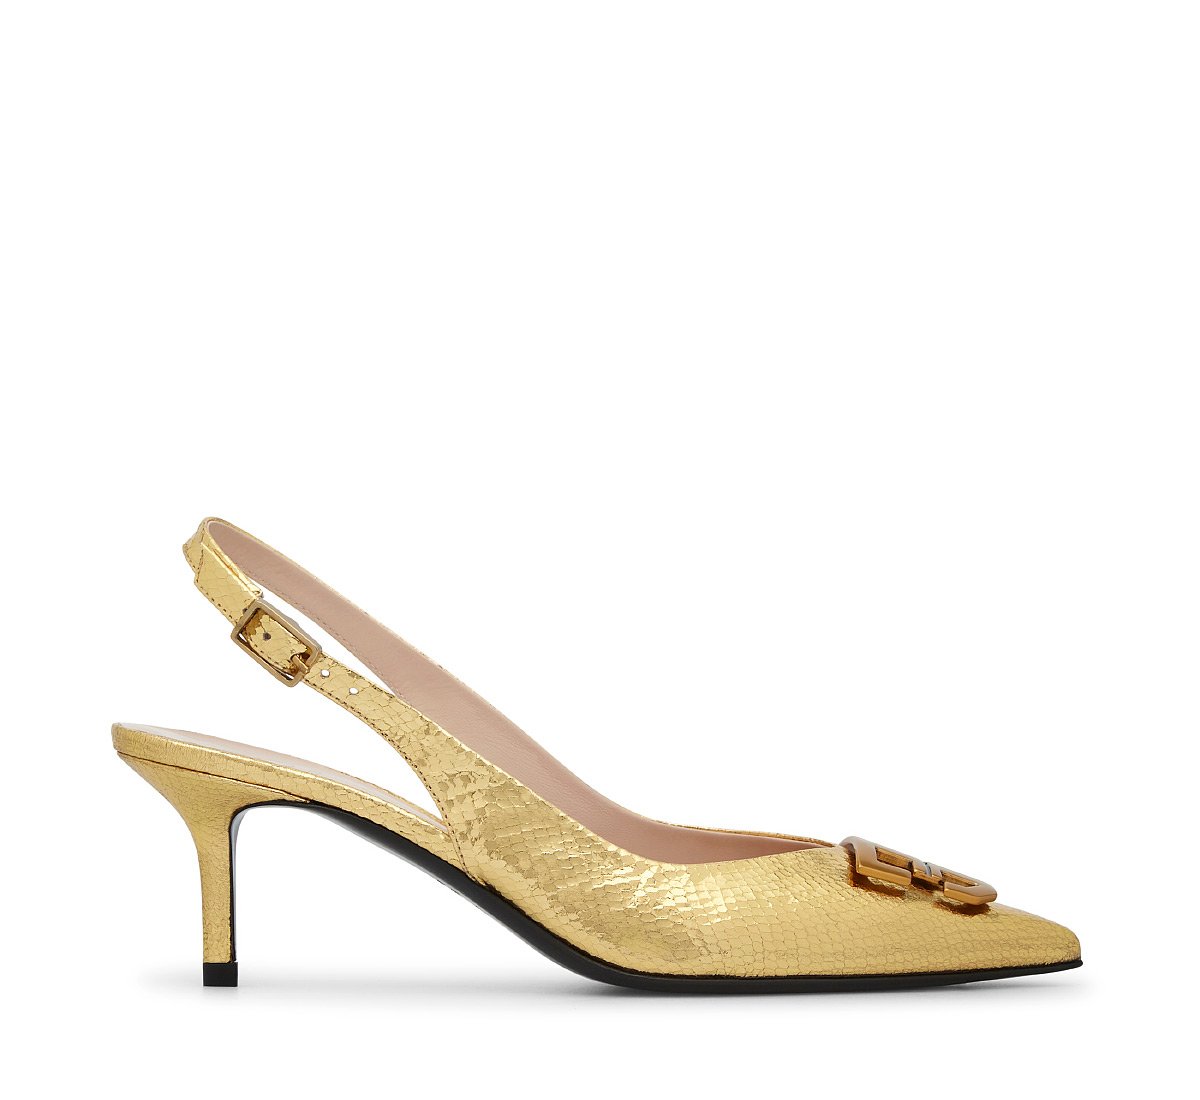 Iconic pump in soft nappa leather